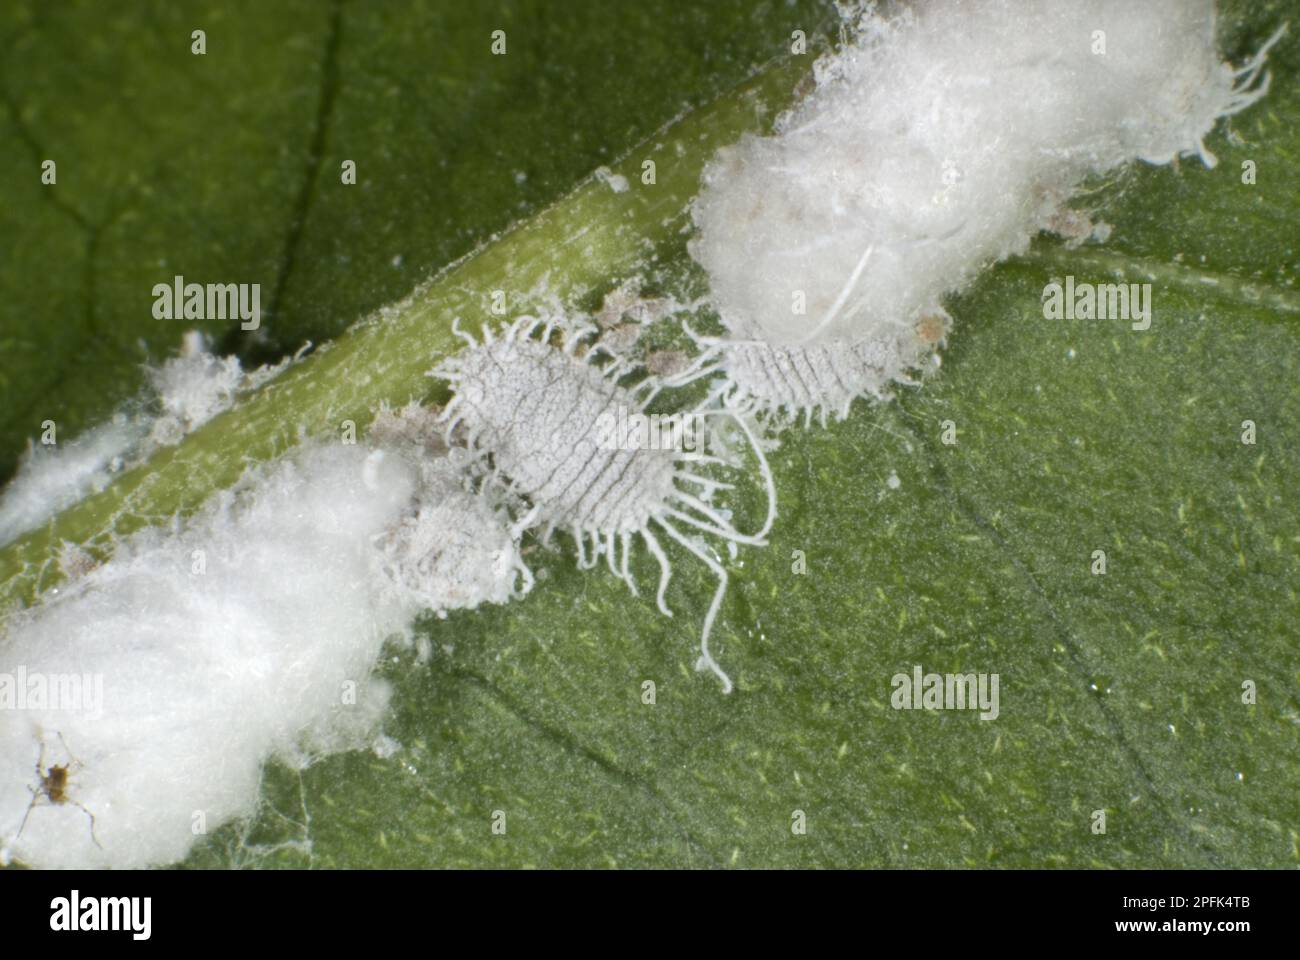 Greenhouse mealybugs, Pseudococcus viburni, with their waxy extrusions along the leaf vein of a bougainvillea houseplant Stock Photo